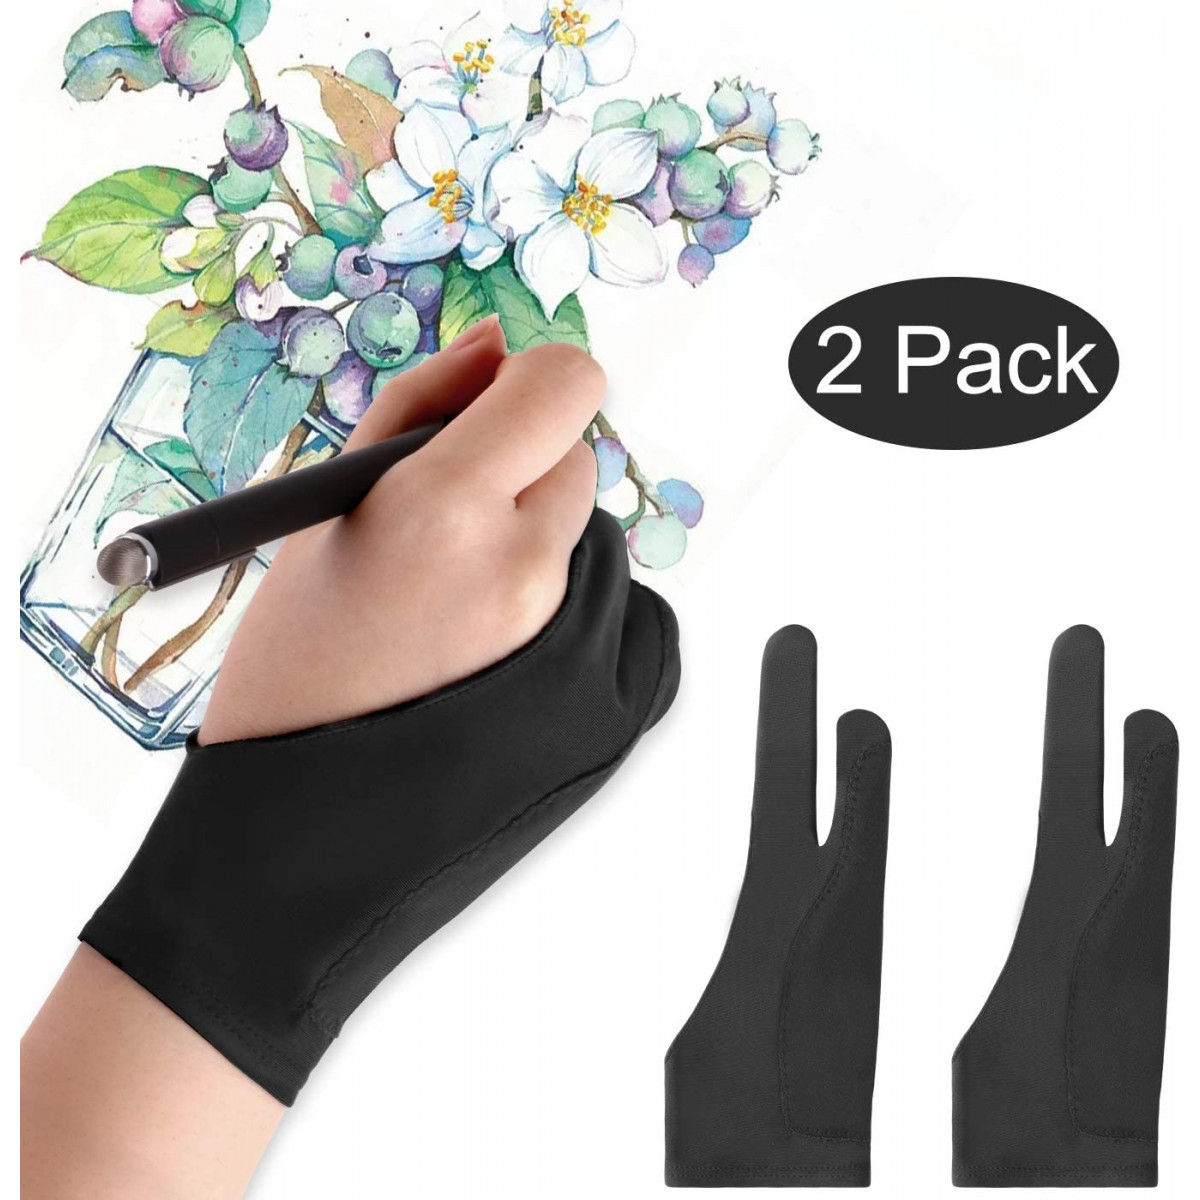 Mixoo Artists Gloves 2 Pack - Palm Rejection Gloves